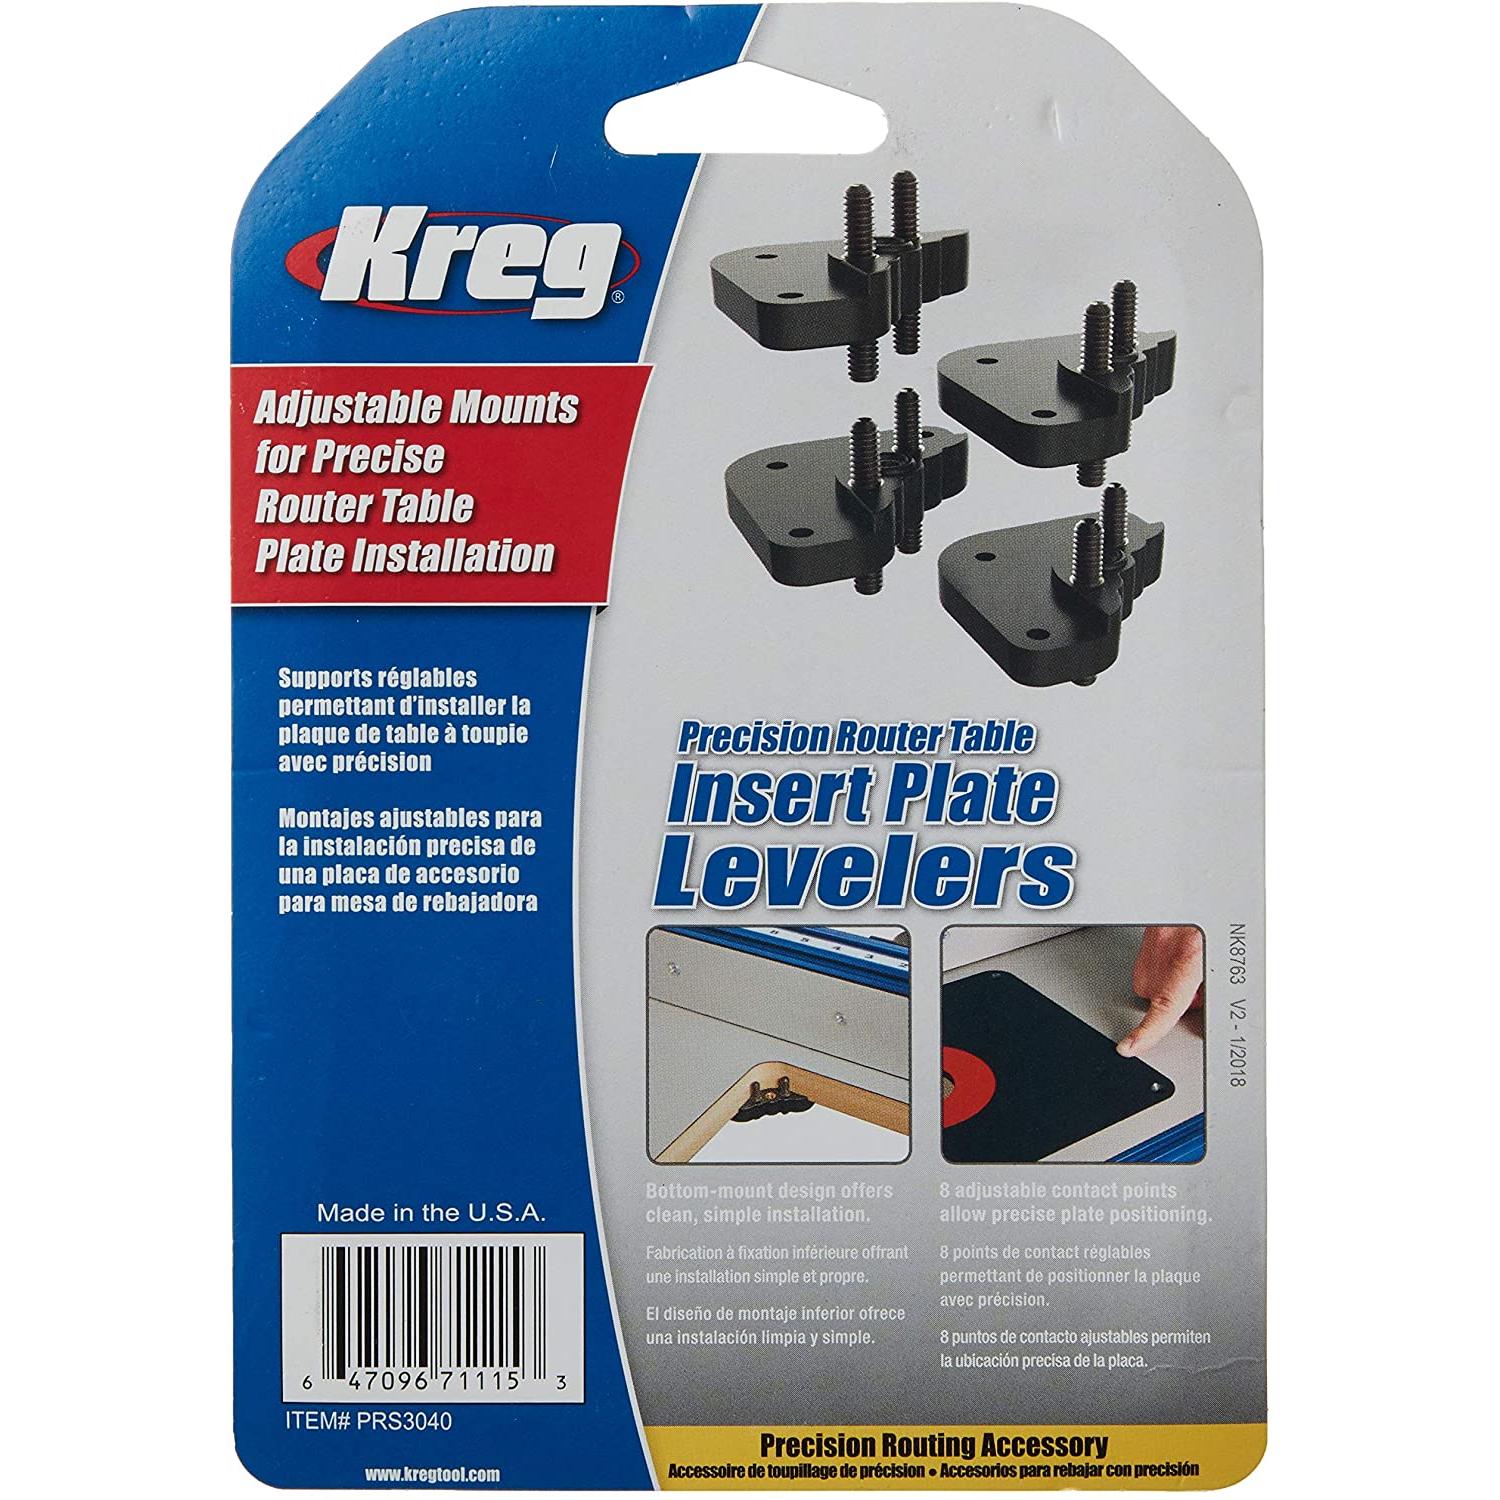 Kreg Precision Router Table Insert Plate Levelers PRS3040 Power Tool Services